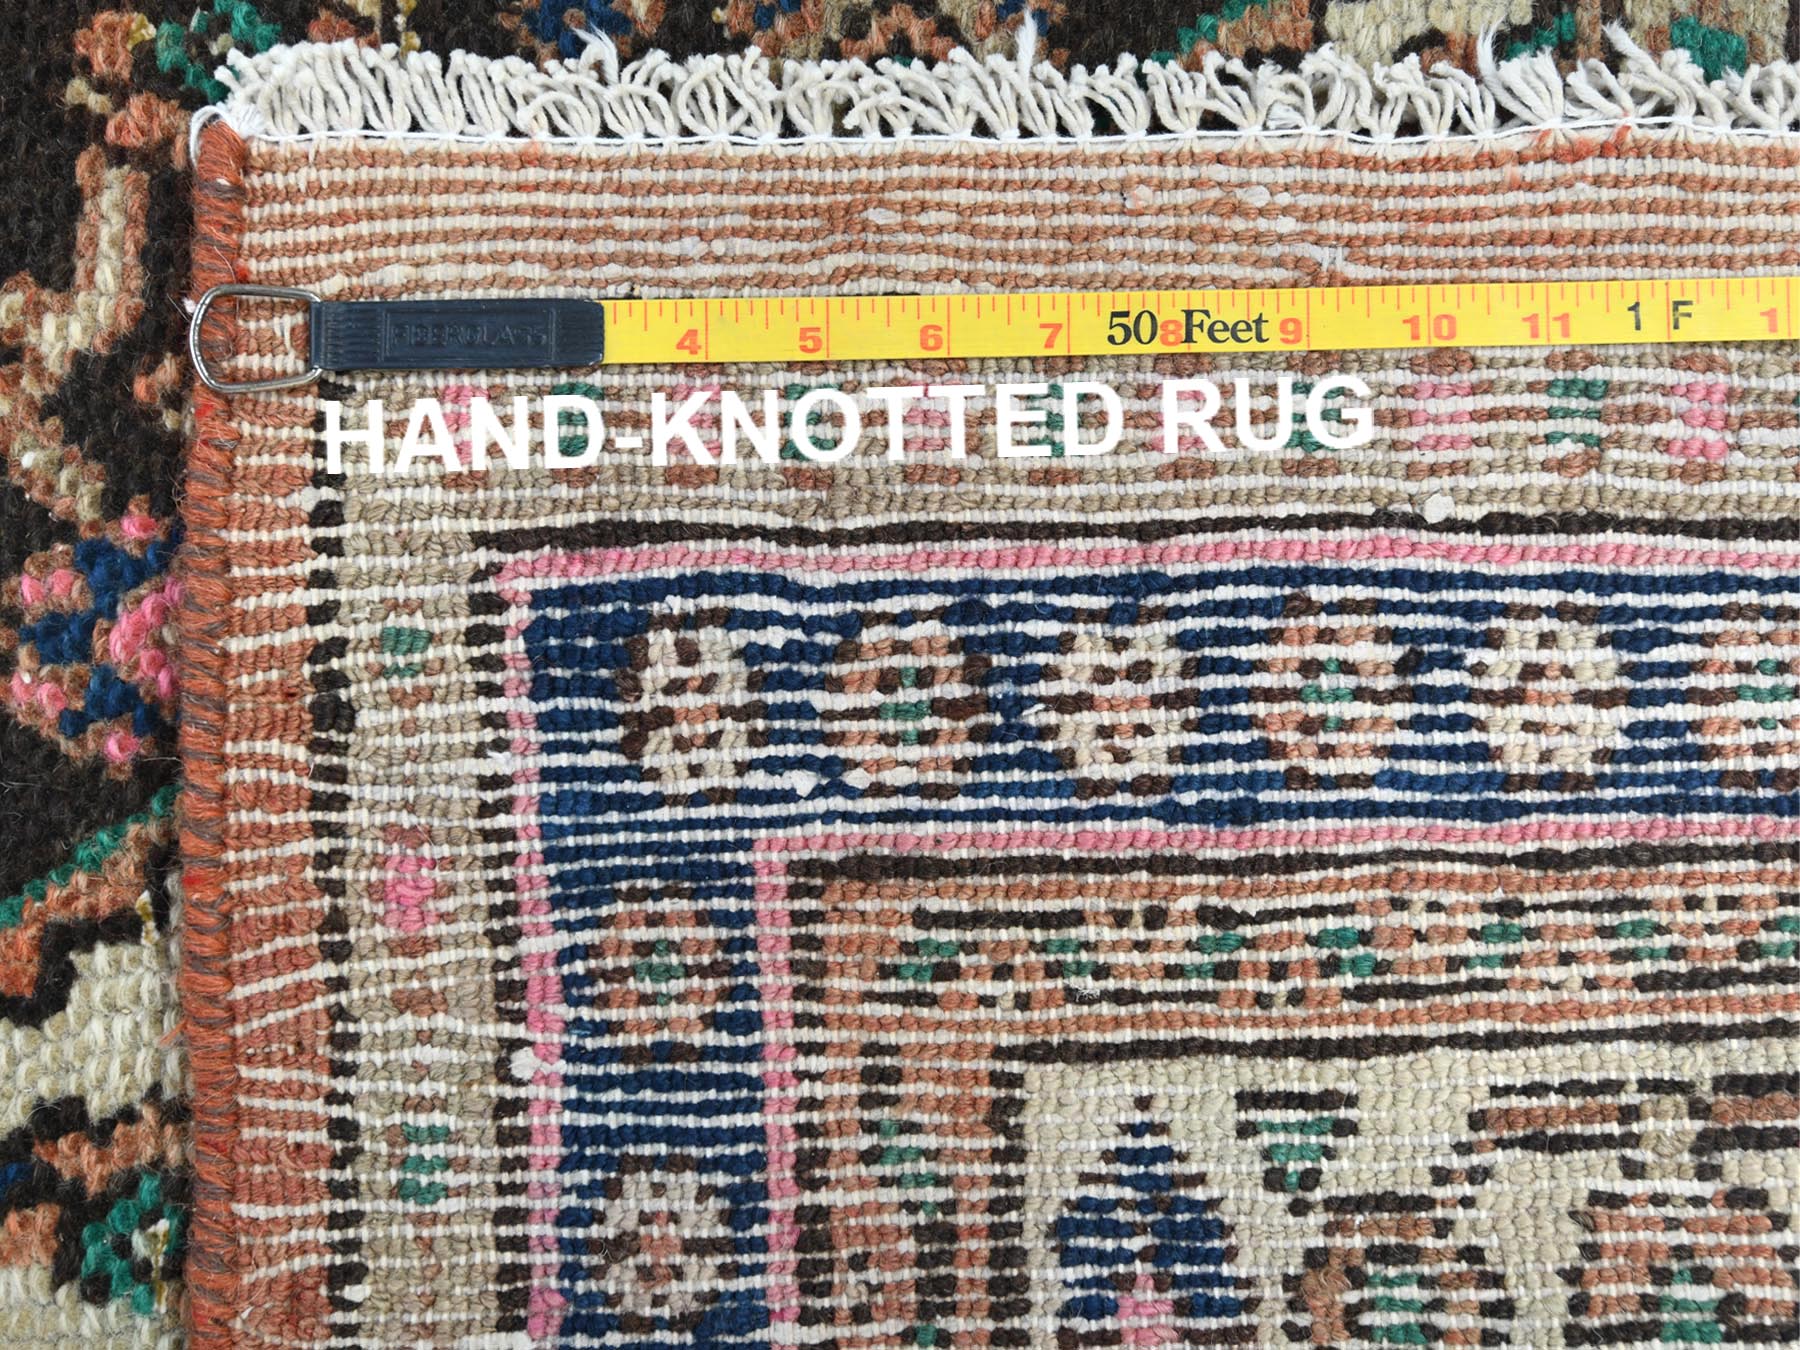 Overdyed & Vintage Rugs LUV730755